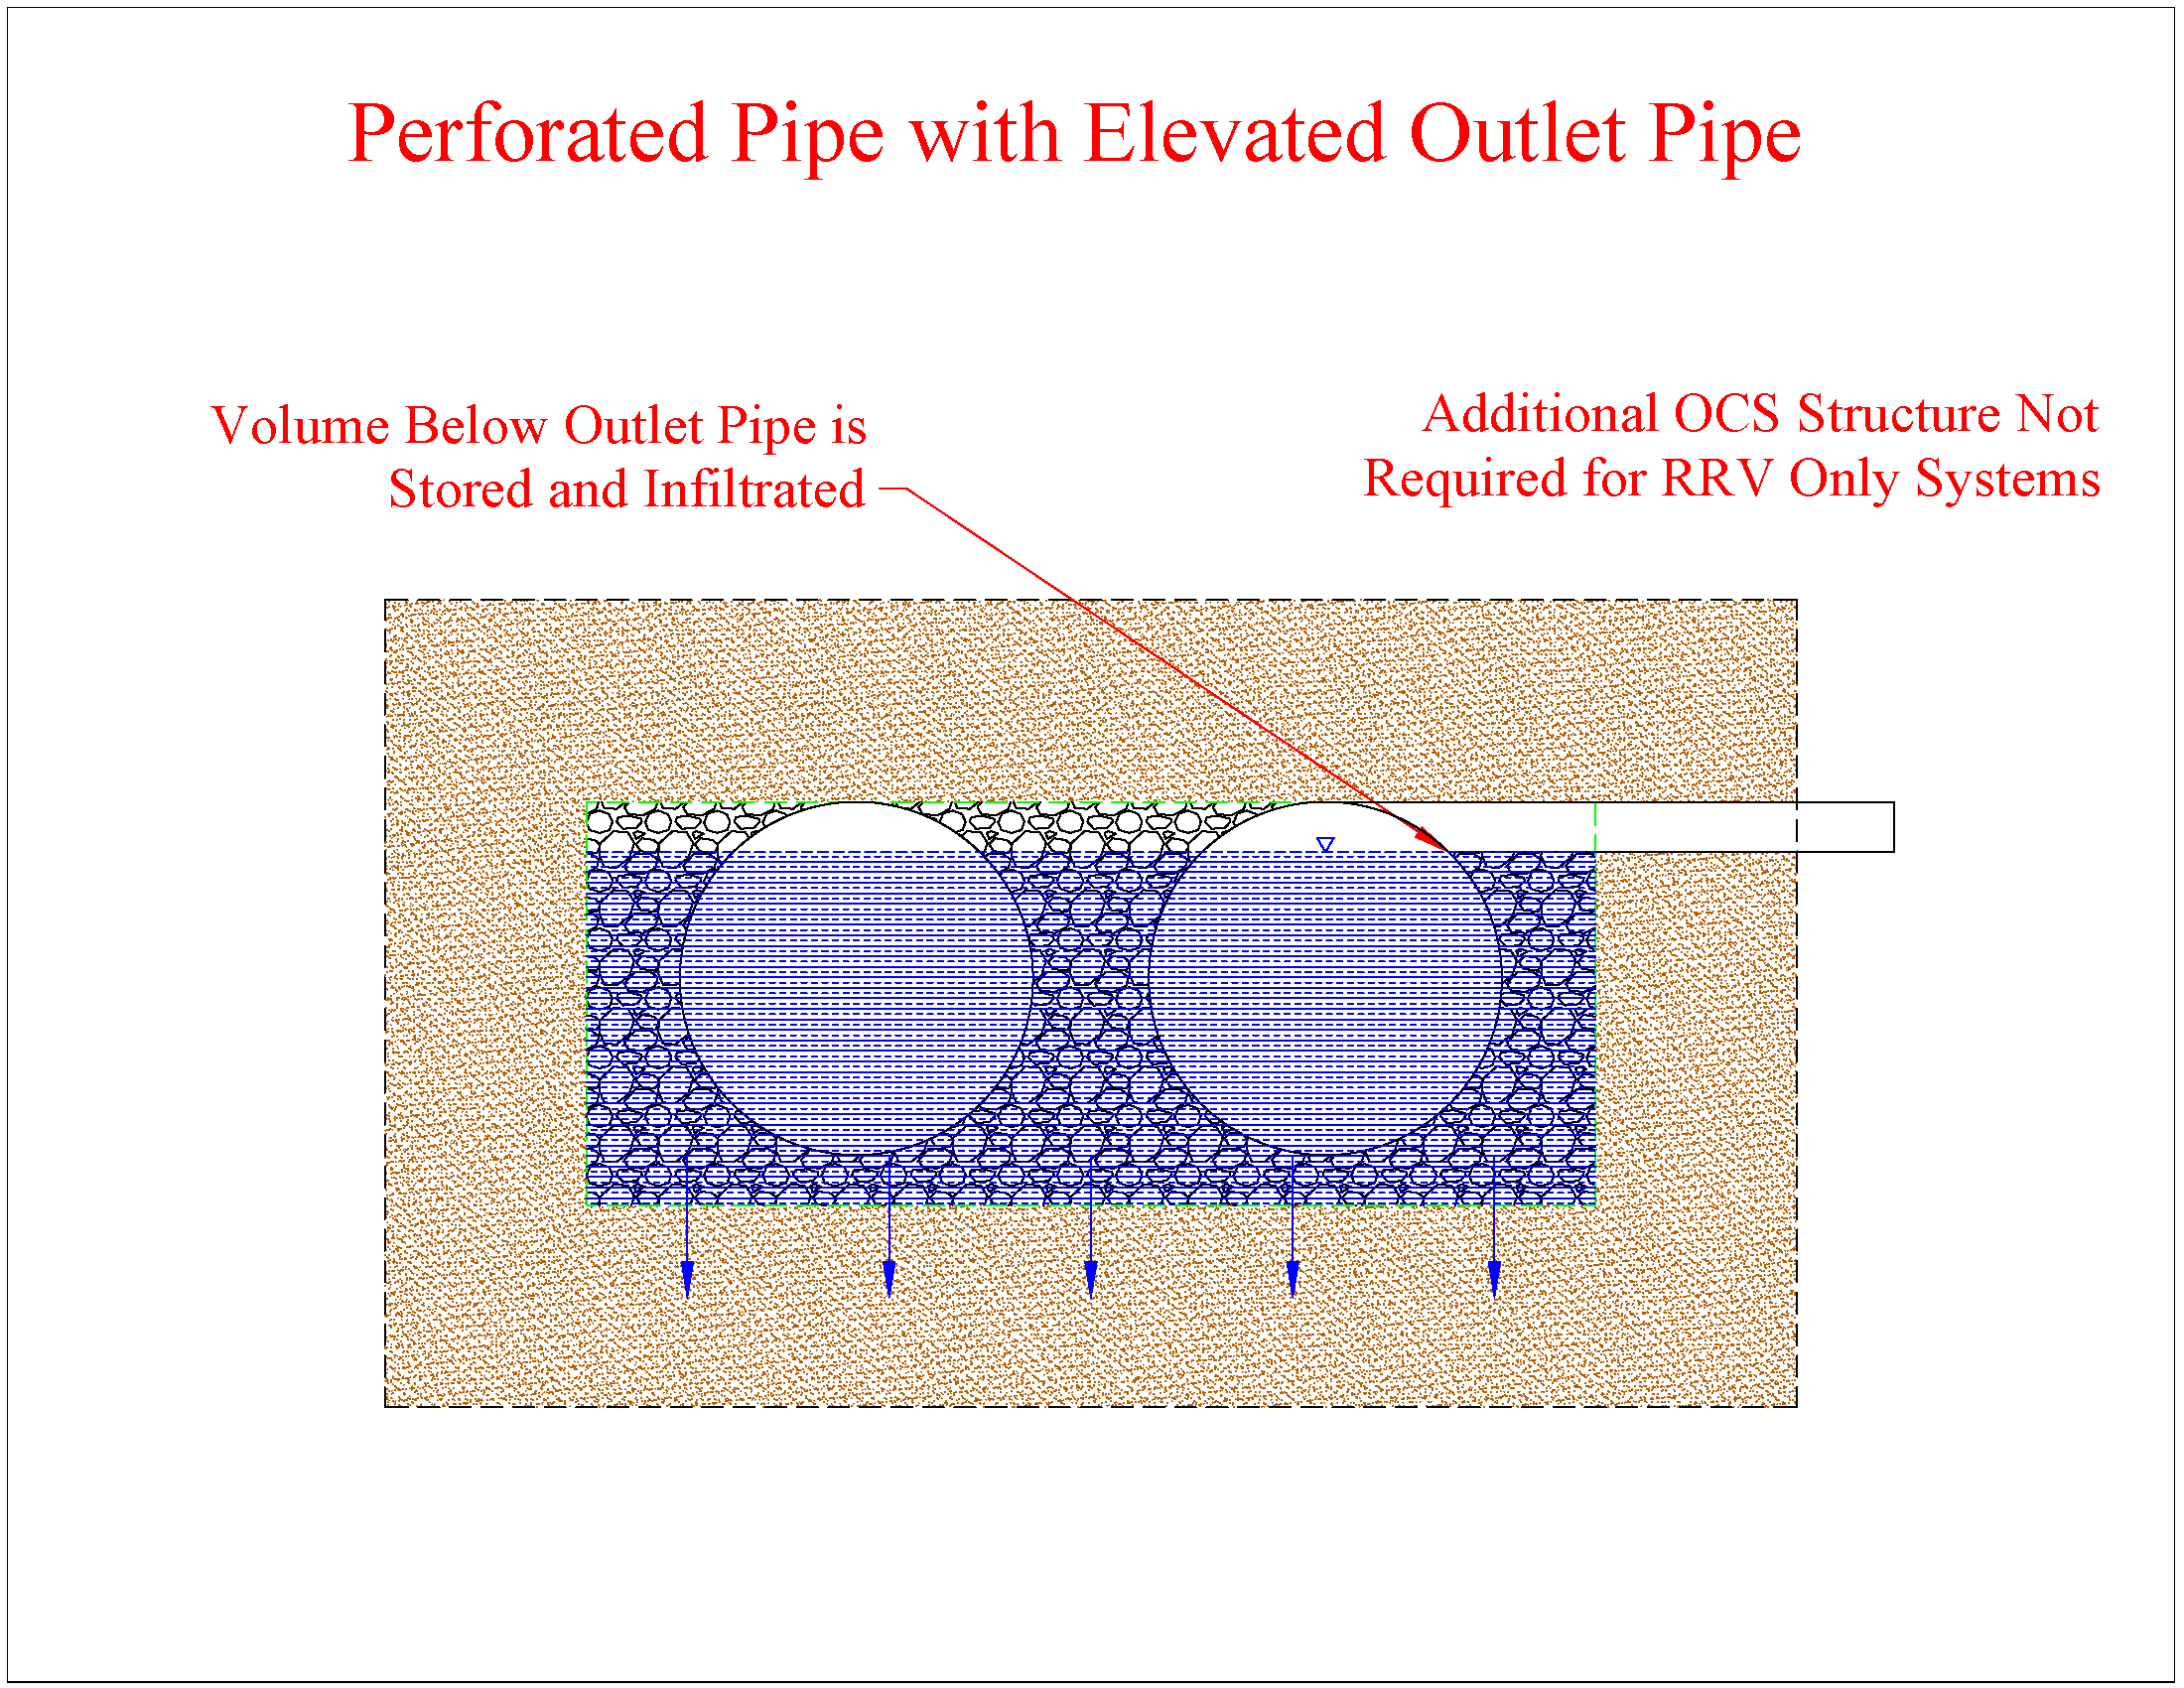 Perforated Pipe with Elevated Outlet Pipe